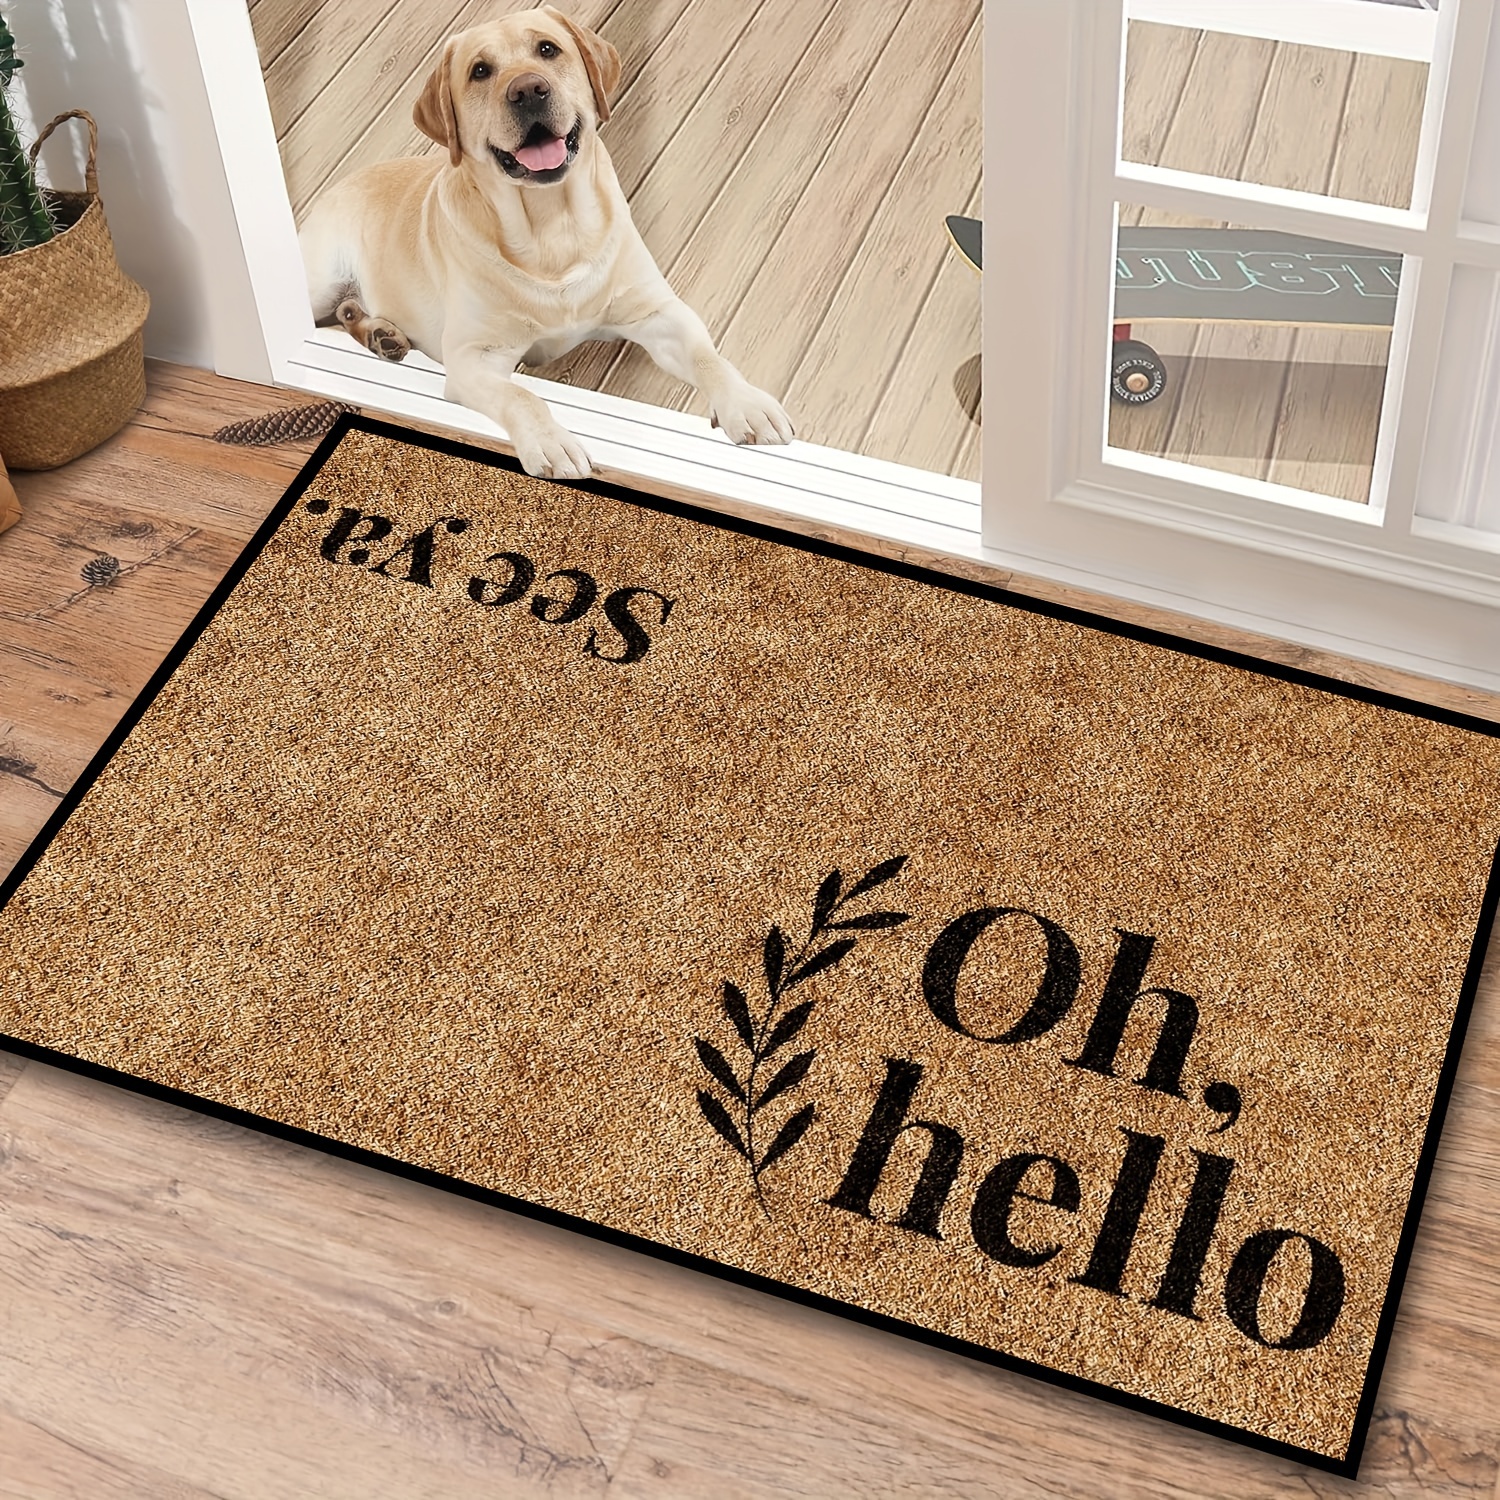 

Chic Floral Welcome Door Mat - Non-slip, Machine Washable For Indoor/outdoor Use - Perfect For Living Room, Kitchen, Bedroom & More